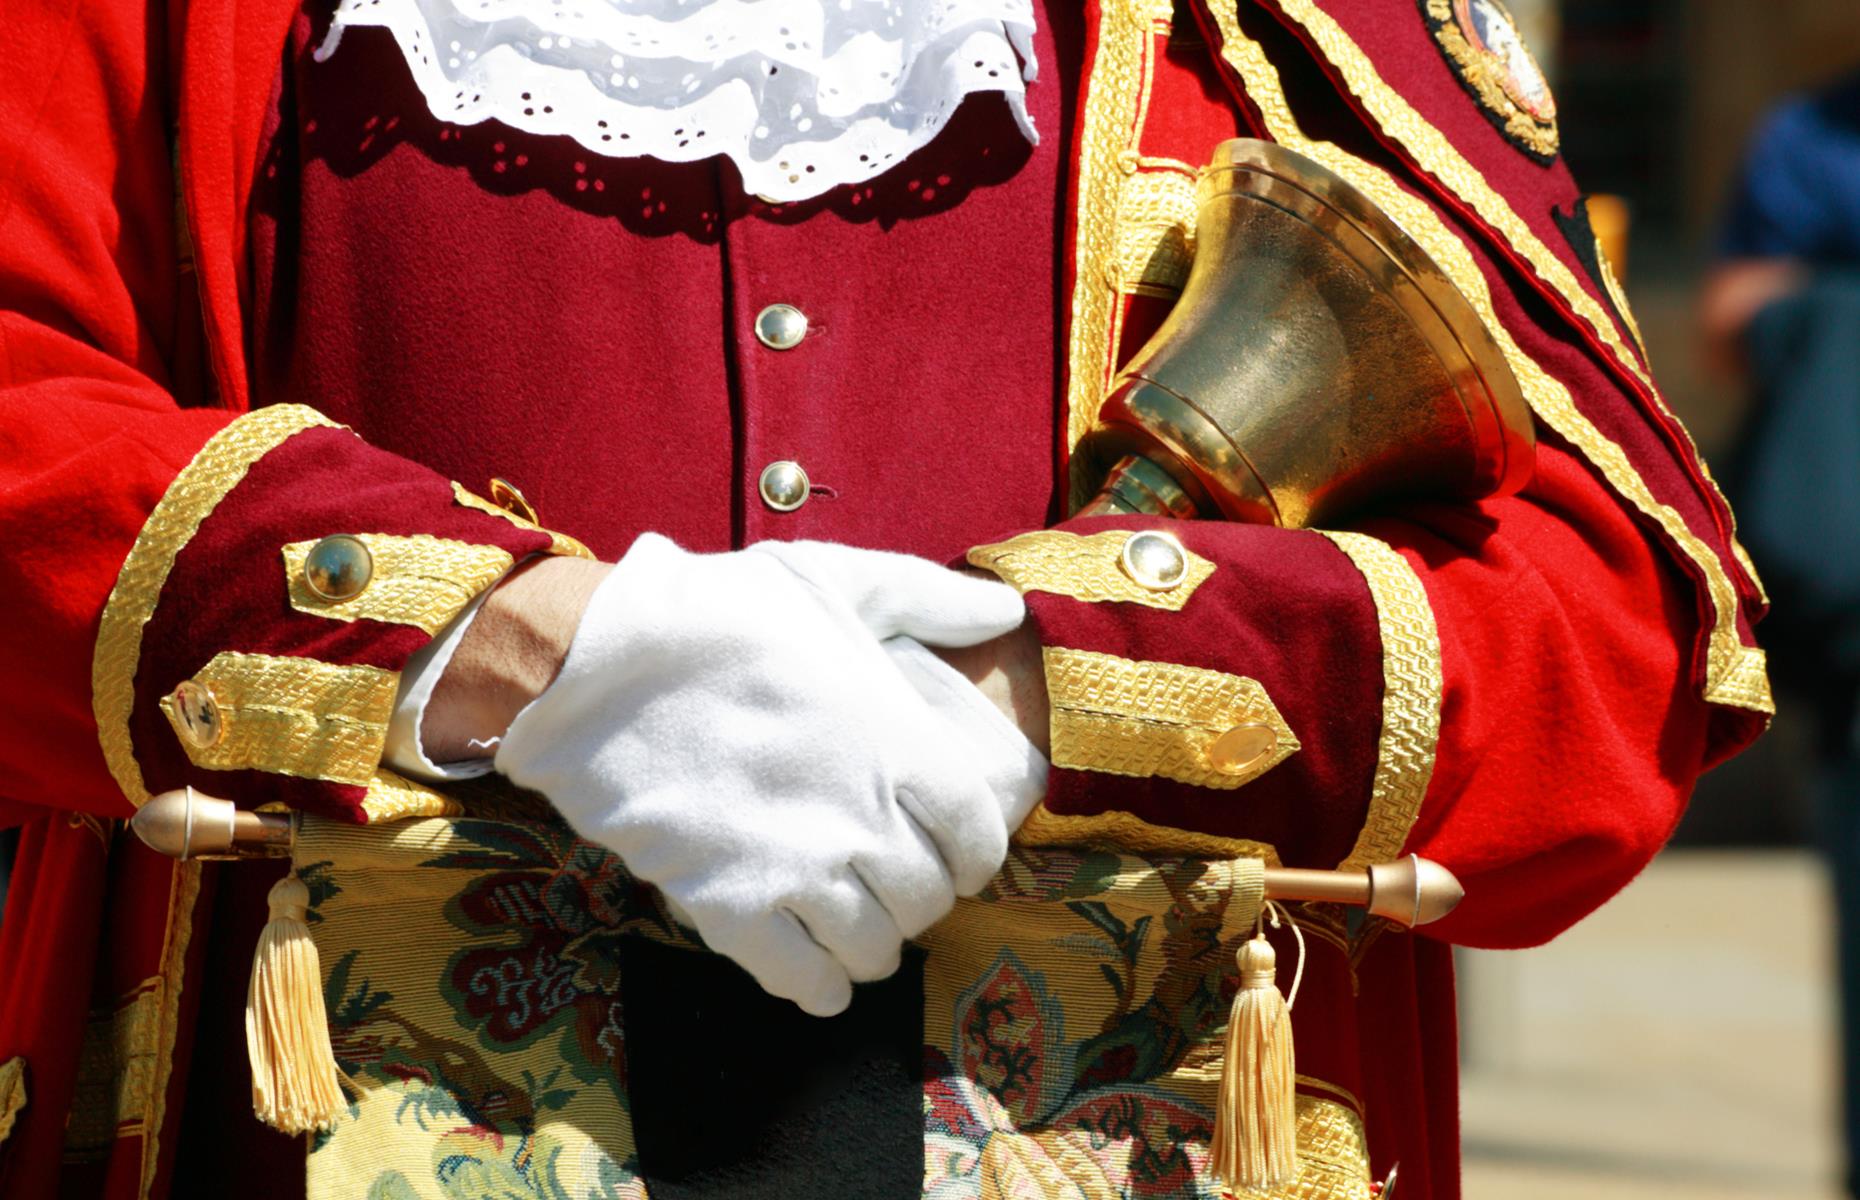 <p>Now few and far between, town criers, the most curious of British traditions, are unlikely to be spotted by incoming visitors. But if tourists do happen across these bellowing figures, they’ll be rightly dumbfounded.</p>  <p>Dressed in red and gold from head to toe, town criers would historically set about hollering the town news. Today, you’ll still occasionally come across them in quaint villages and remote little towns.</p>